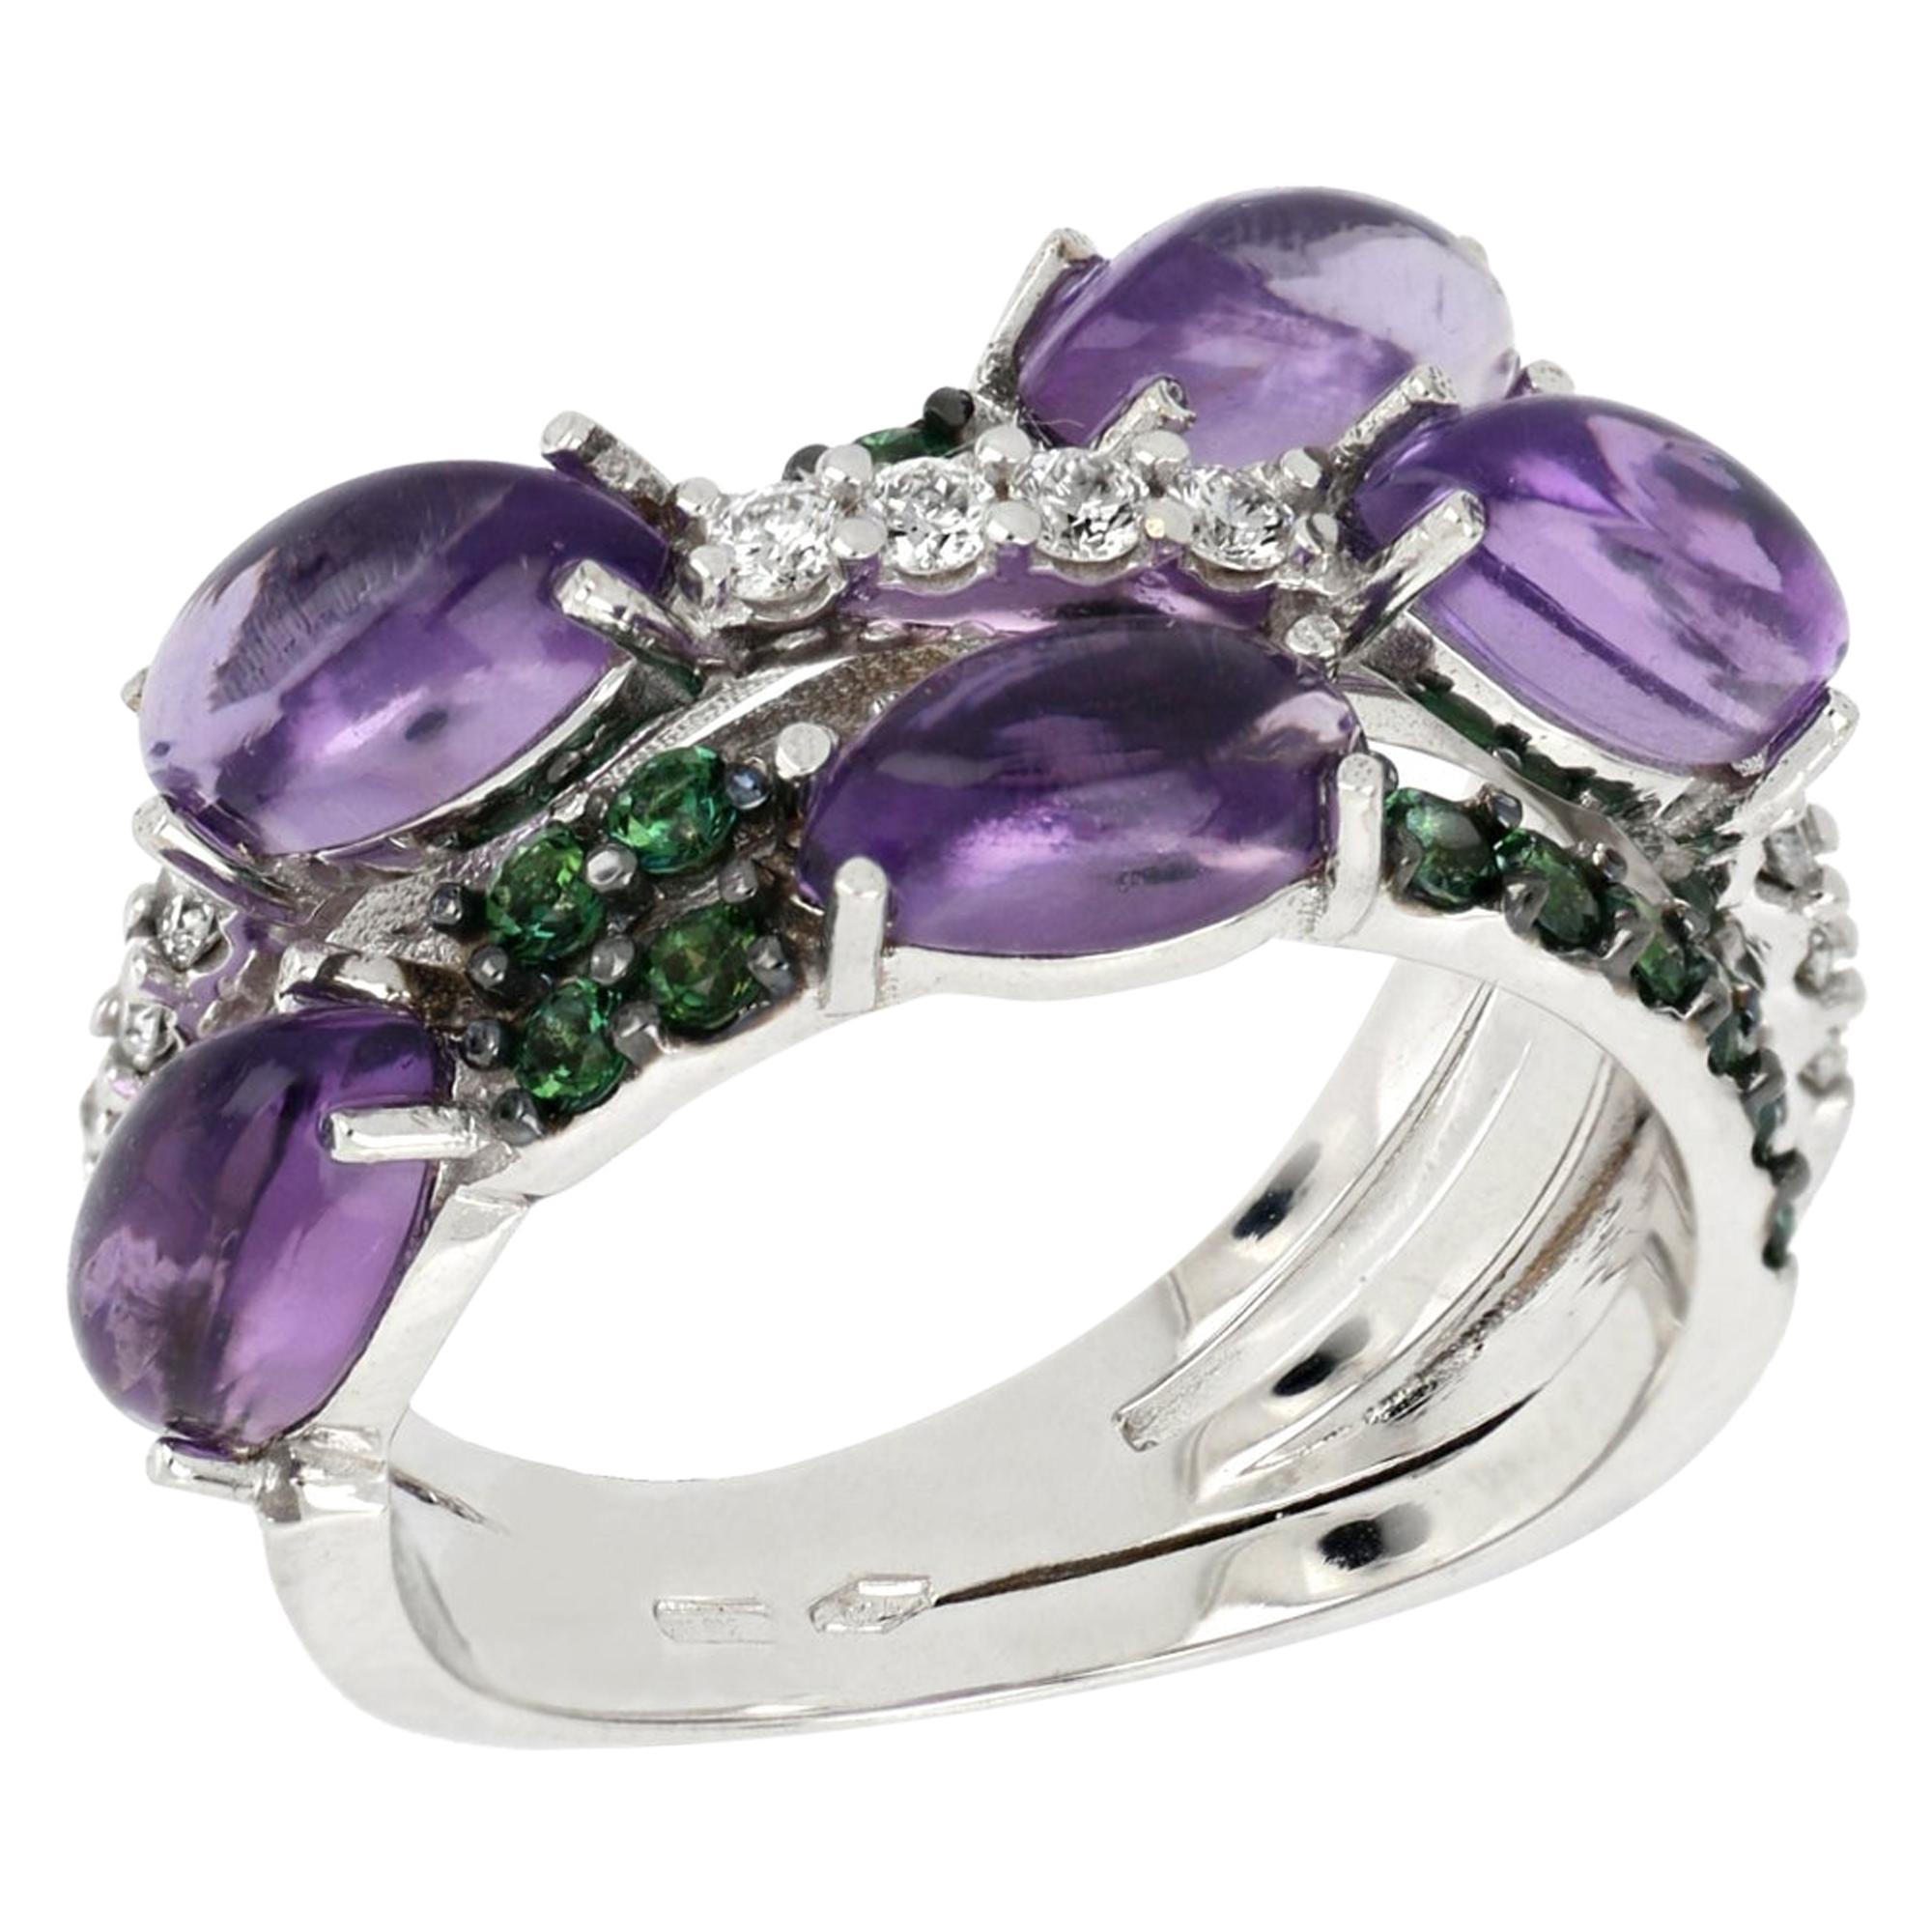 For Sale:  18kt White Gold Les Papillons Purple Amethyst Ring with Topazes and Diamonds